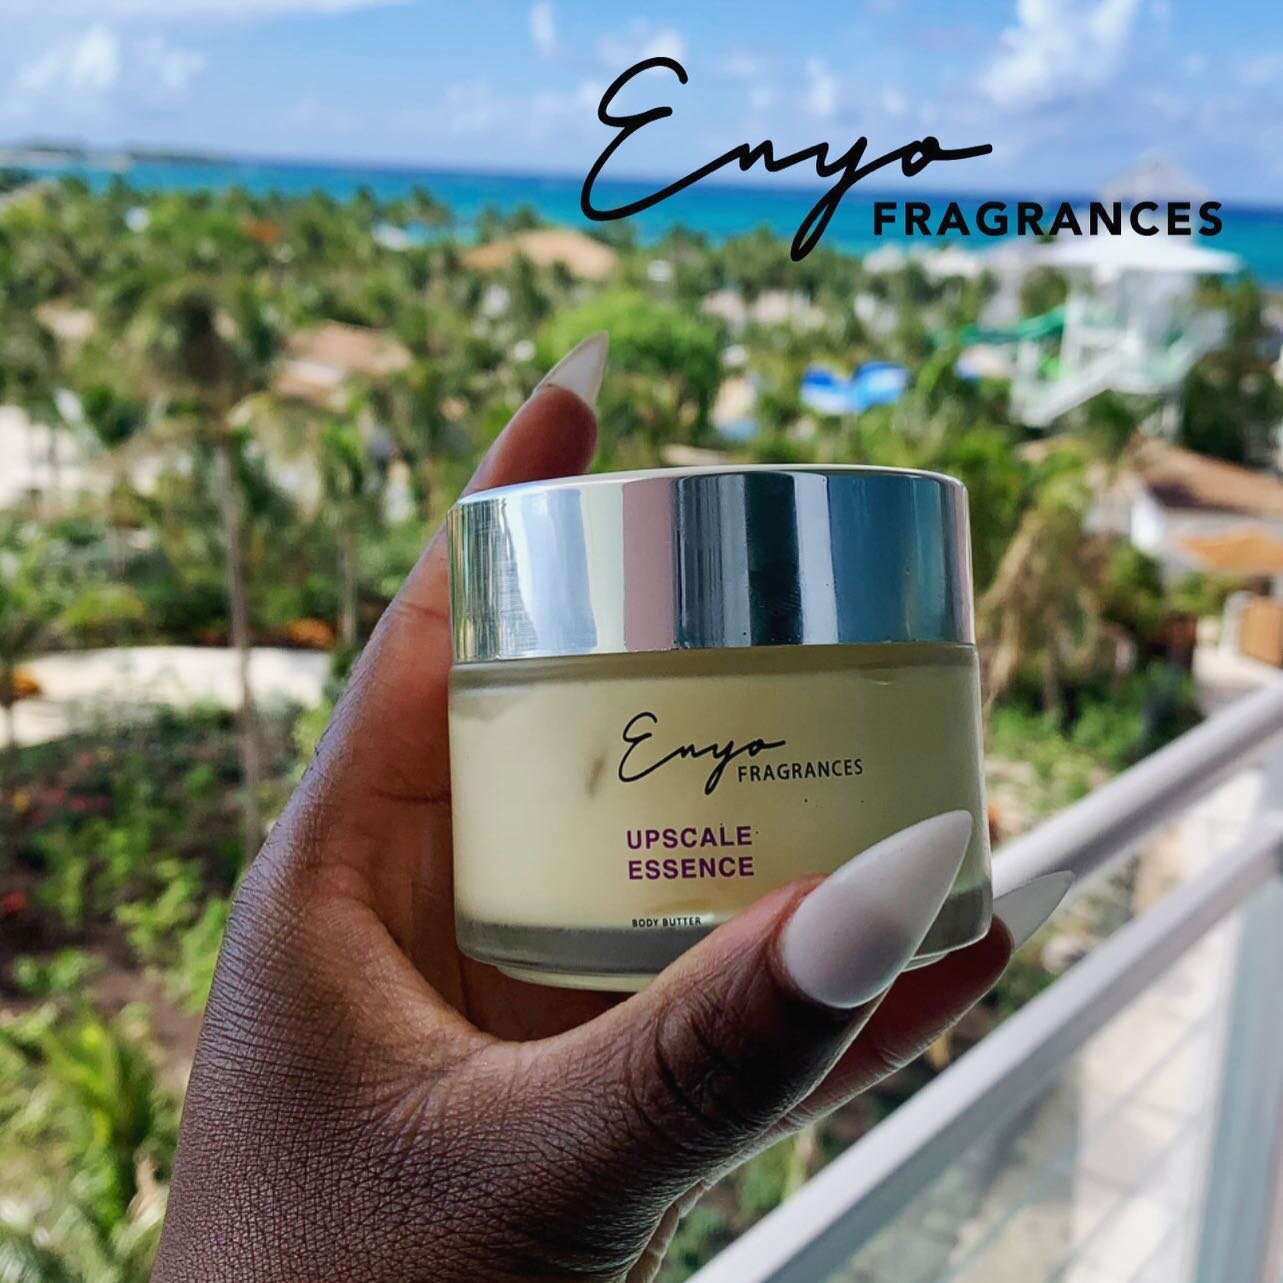 Picture mail! take the scent of vacation, upscale essence, with you! All weekend long 15% off all orders using code JULY4TH15 ✨✨✨✨✨

#enyofragrances #bodybutter #fragrance #eaudeparfum #skincare #skincareroutine #oud #blackownedbusiness #sale #sheabu